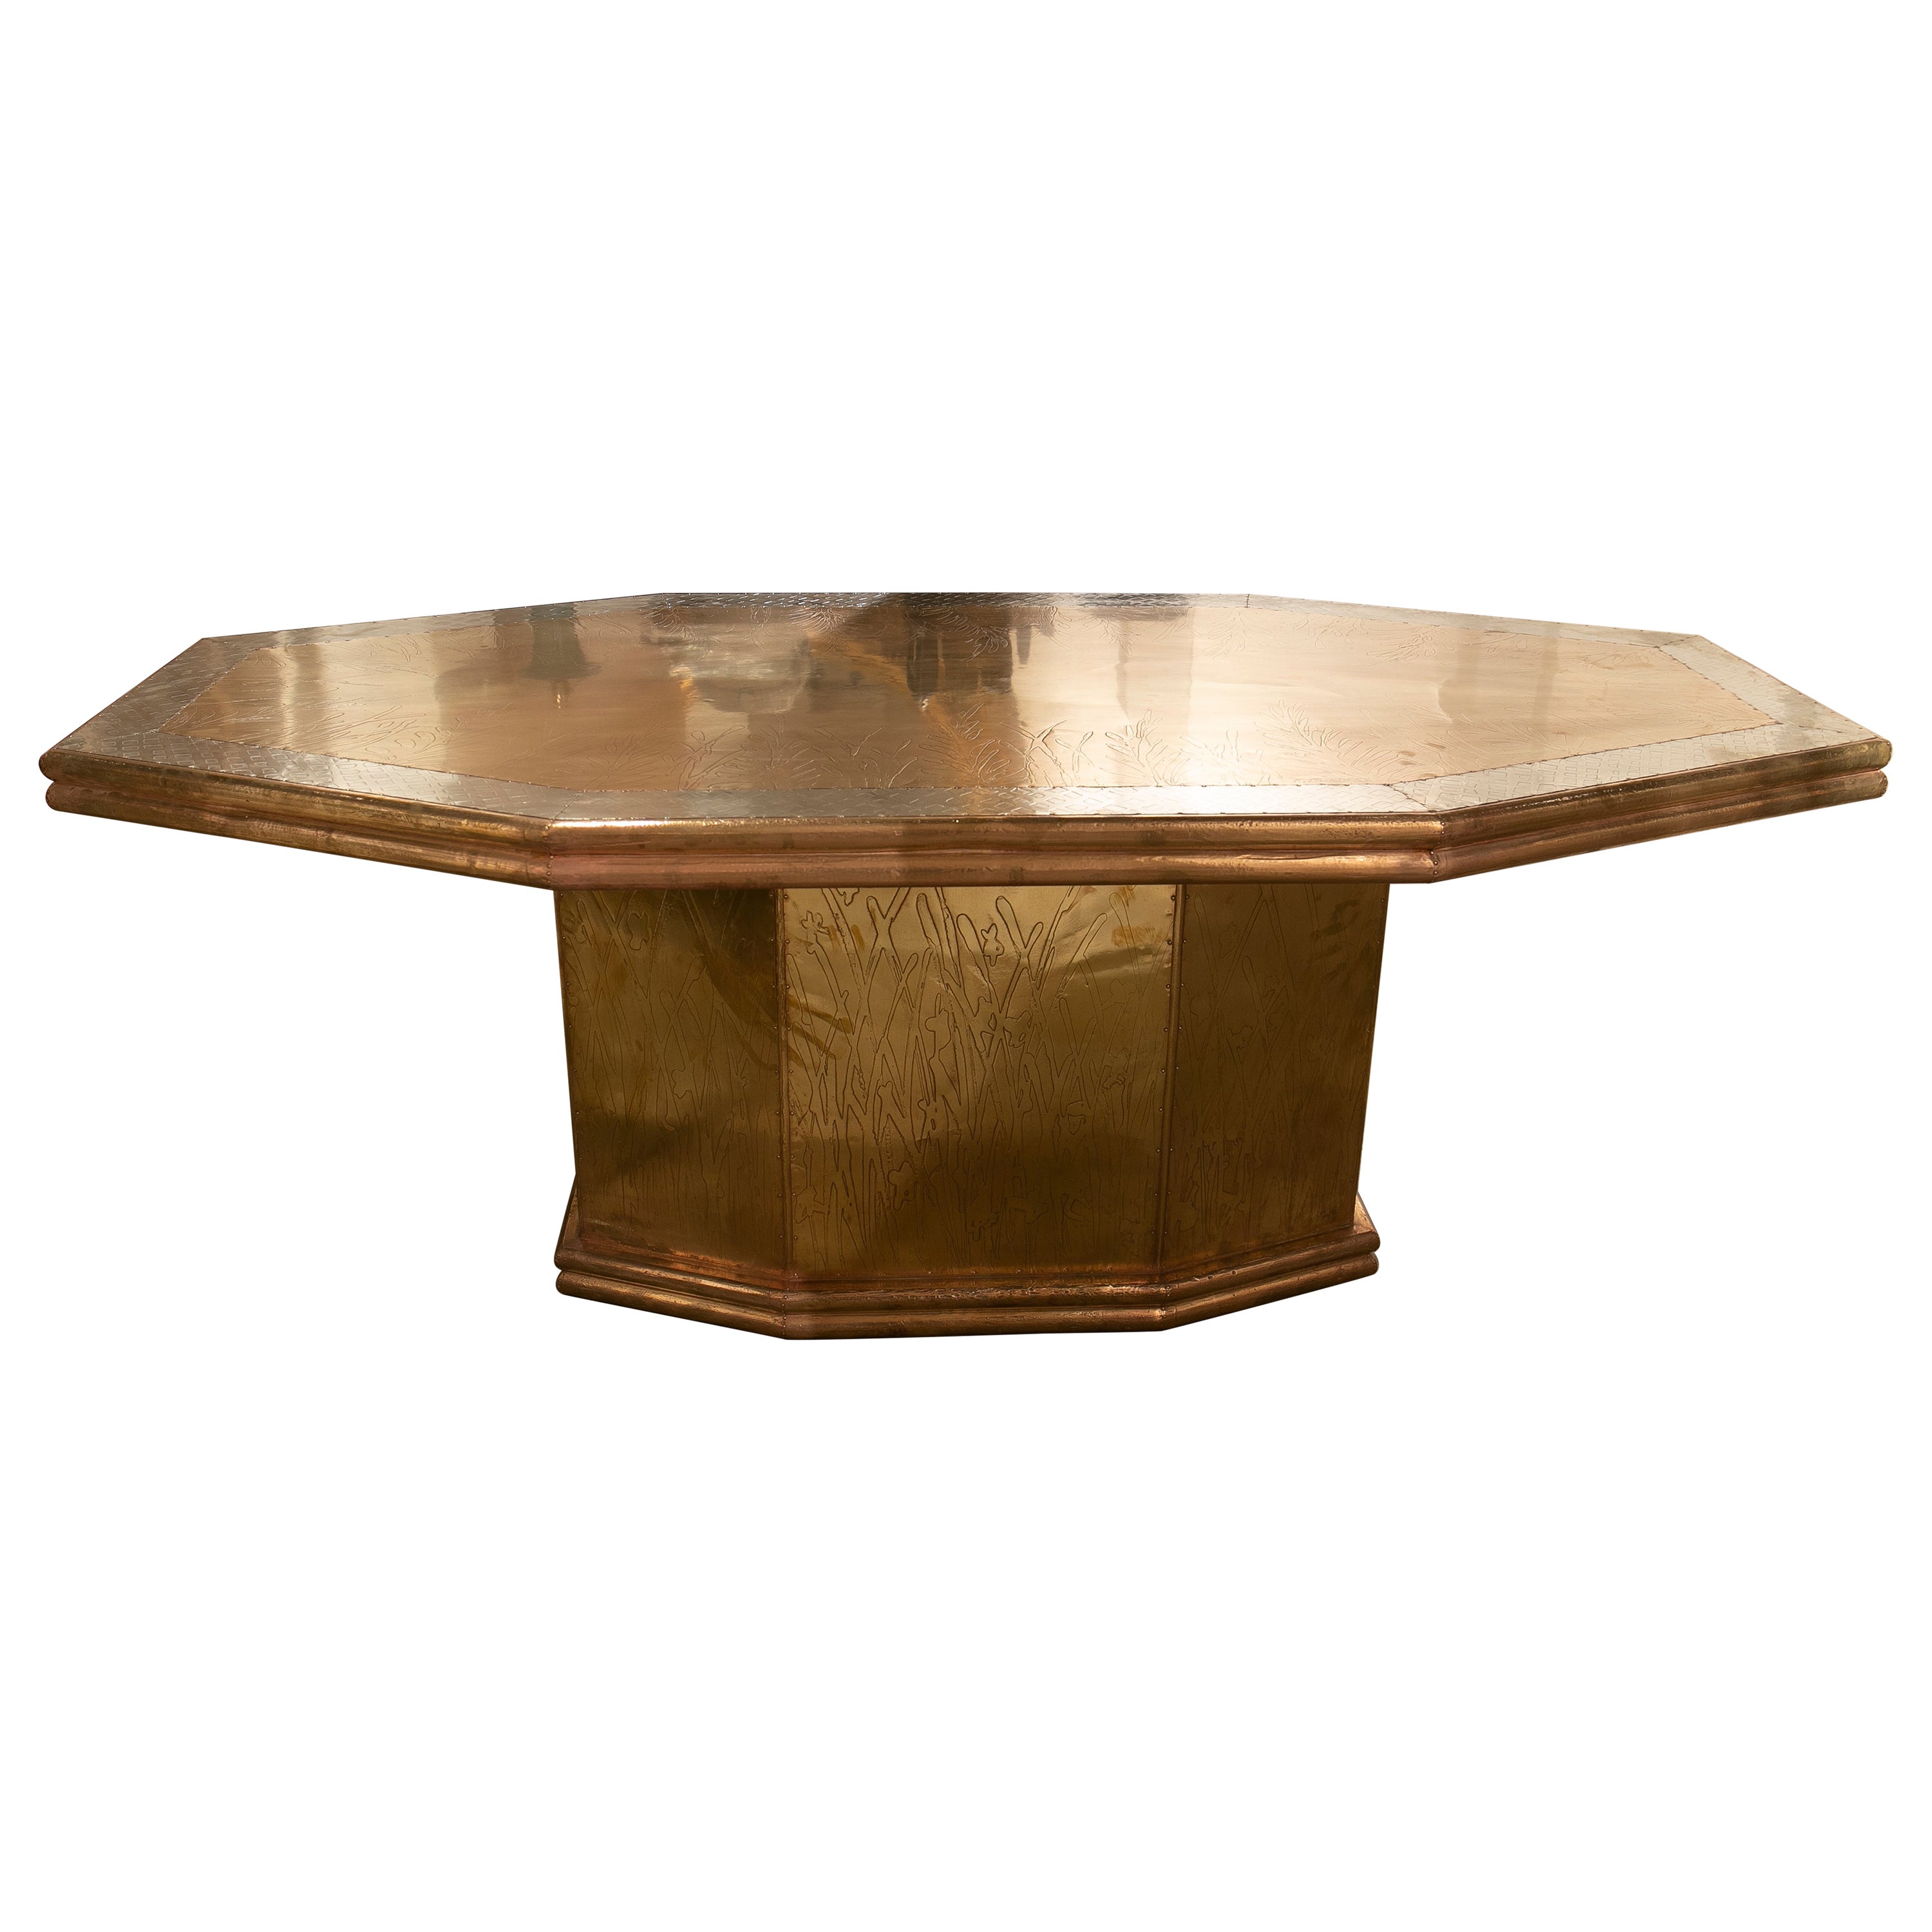 French Modern Gilded Brass Table in a Golden and Silver Finish